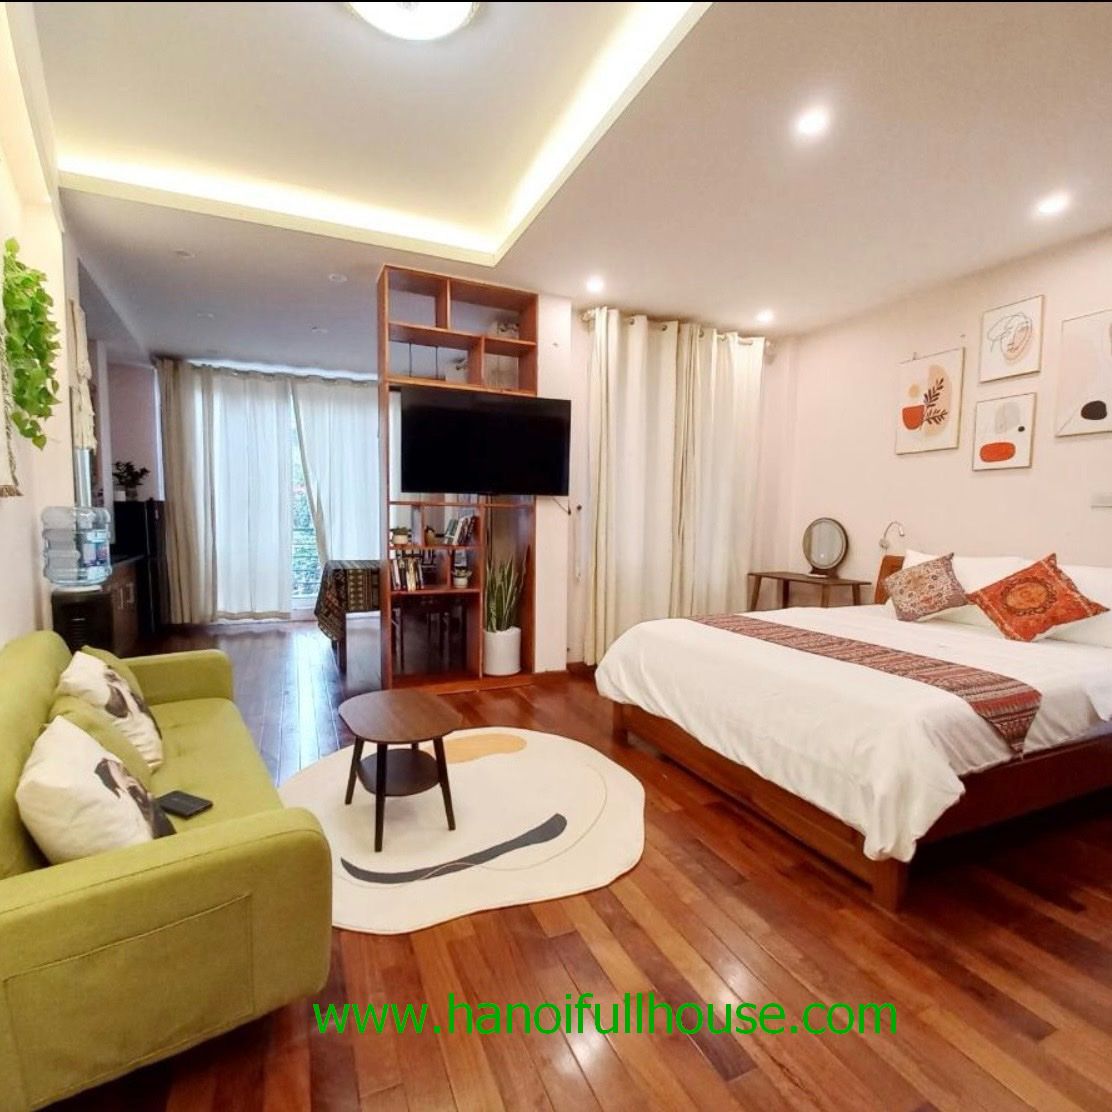 Nice one bedroom apartment with full furniture in Hanoi for rent